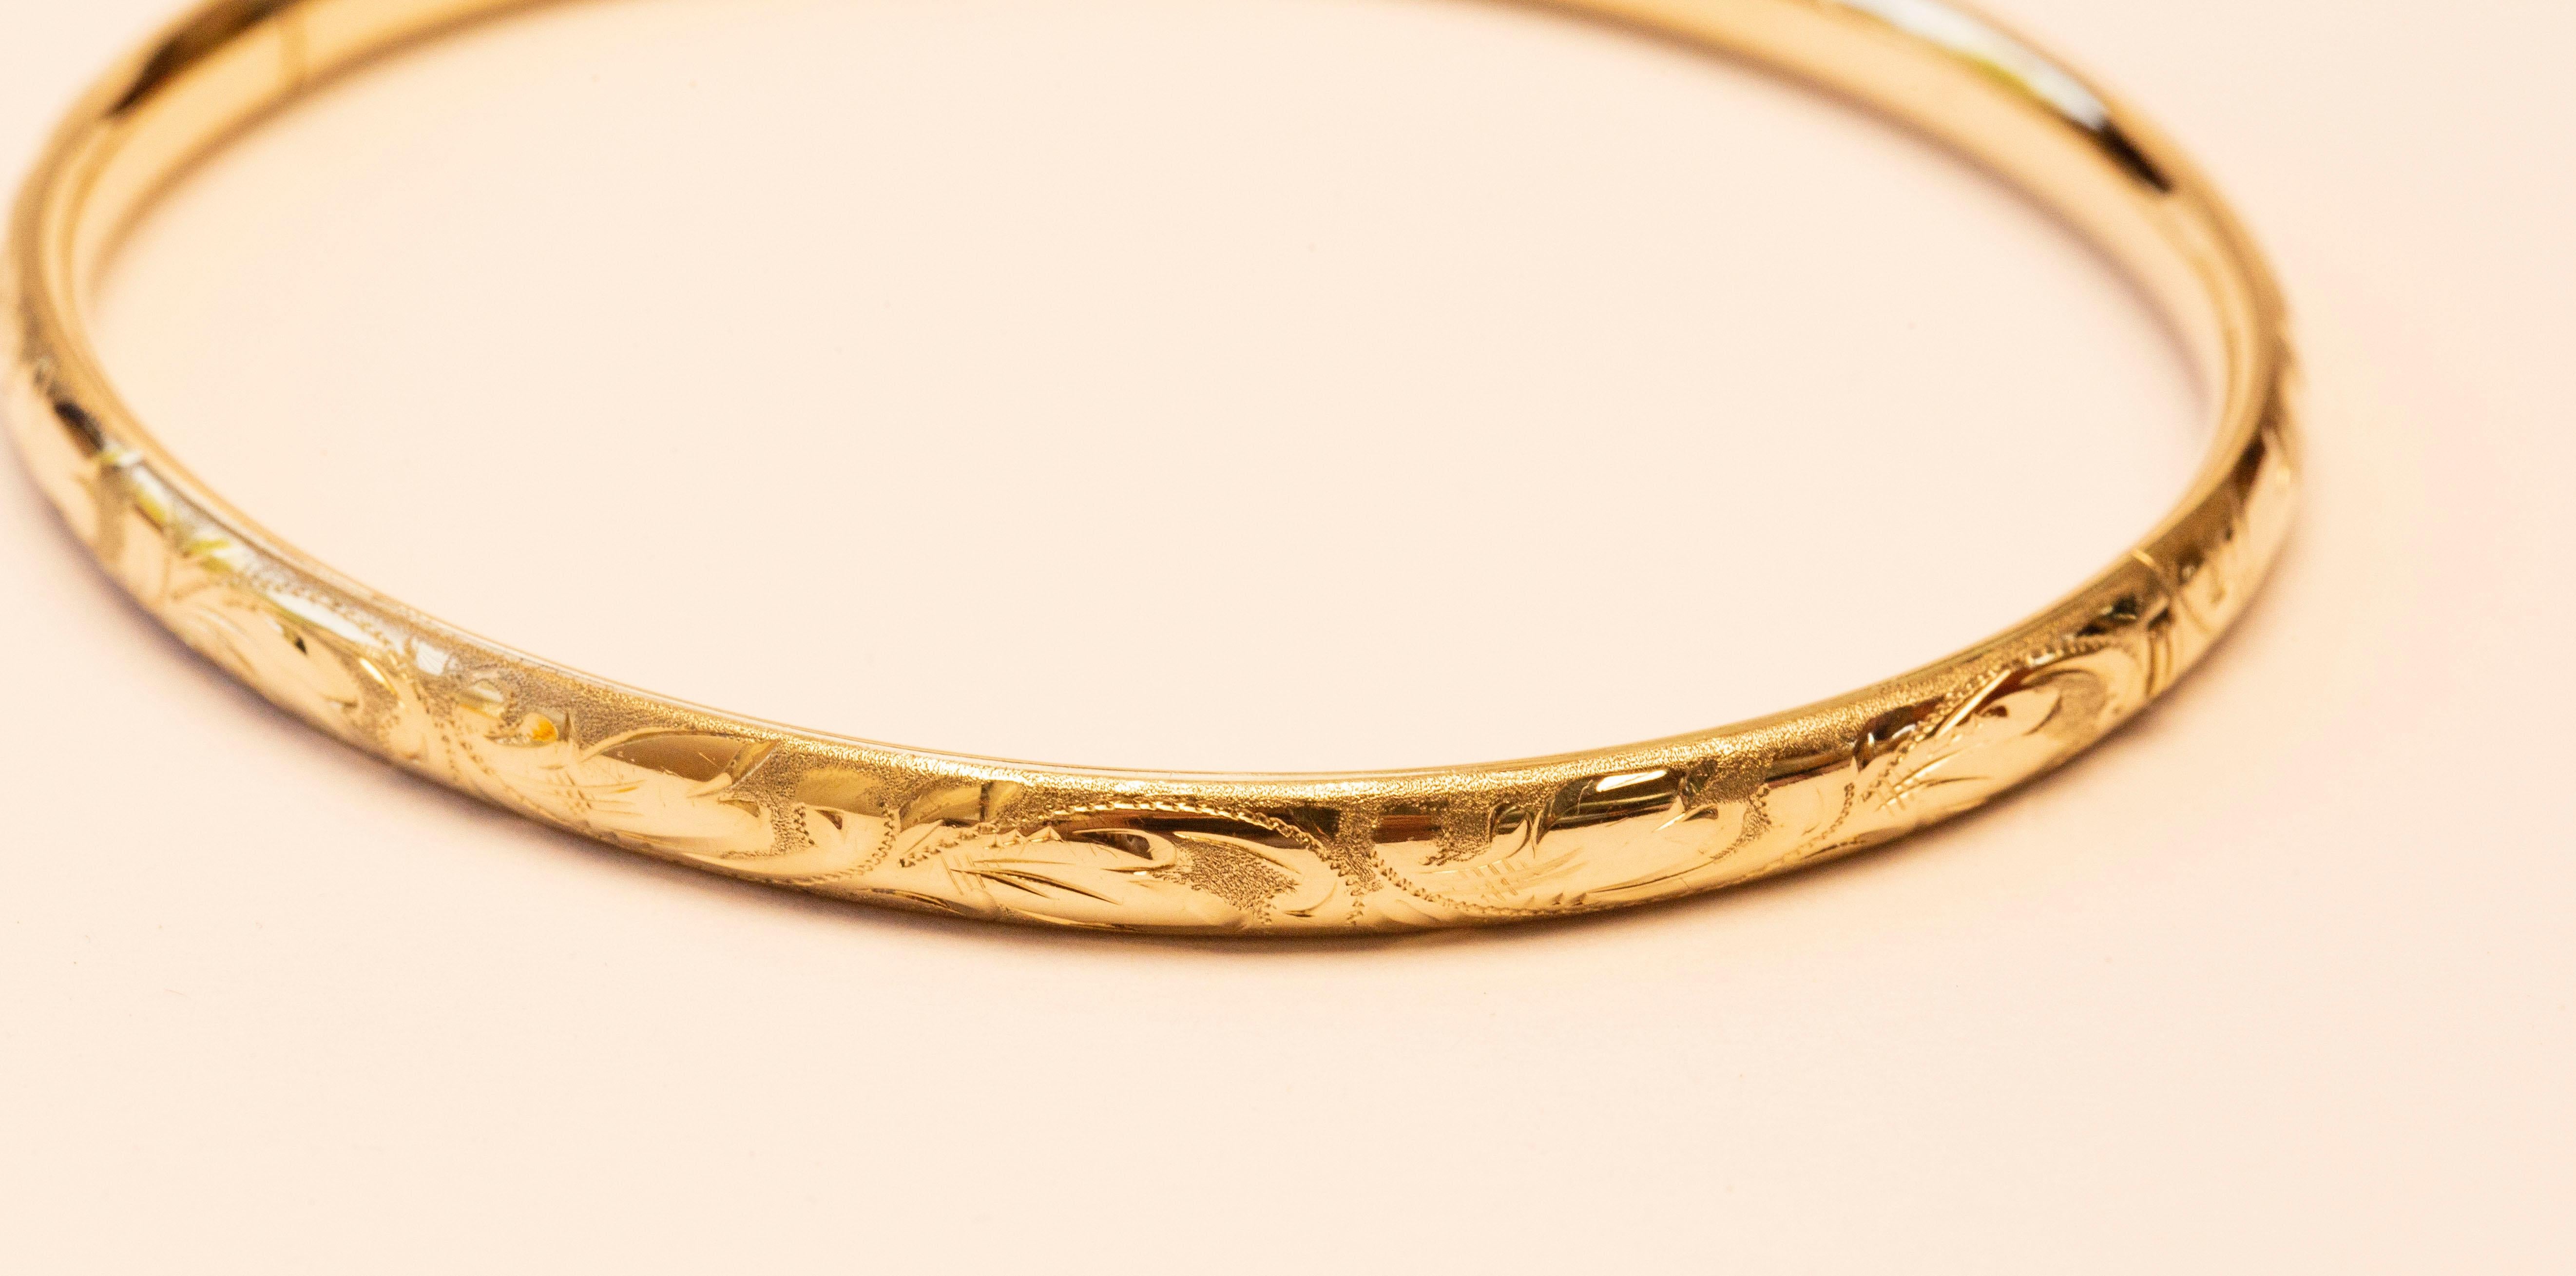 A vintage 14 karat solid yellow gold bangle bracelet with engraved floral and leaf decoration. The bracelet was made in the 1960 and it features a retro vibe that can be matched with classy as well as modern outfits.  The bracelet is in very good